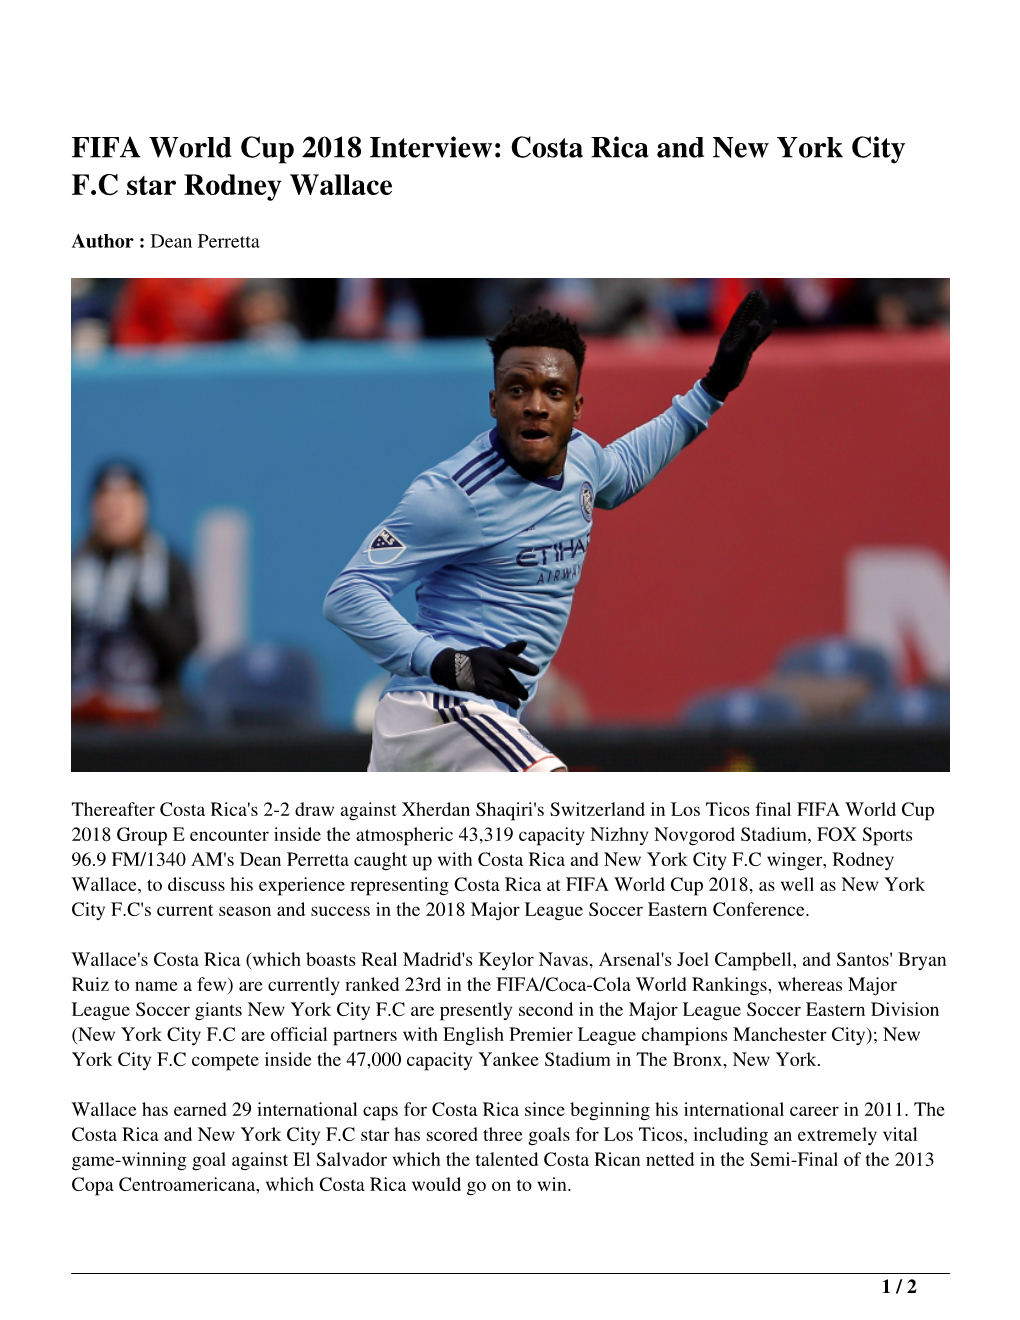 FIFA World Cup 2018 Interview: Costa Rica and New York City F.C Star Rodney Wallace